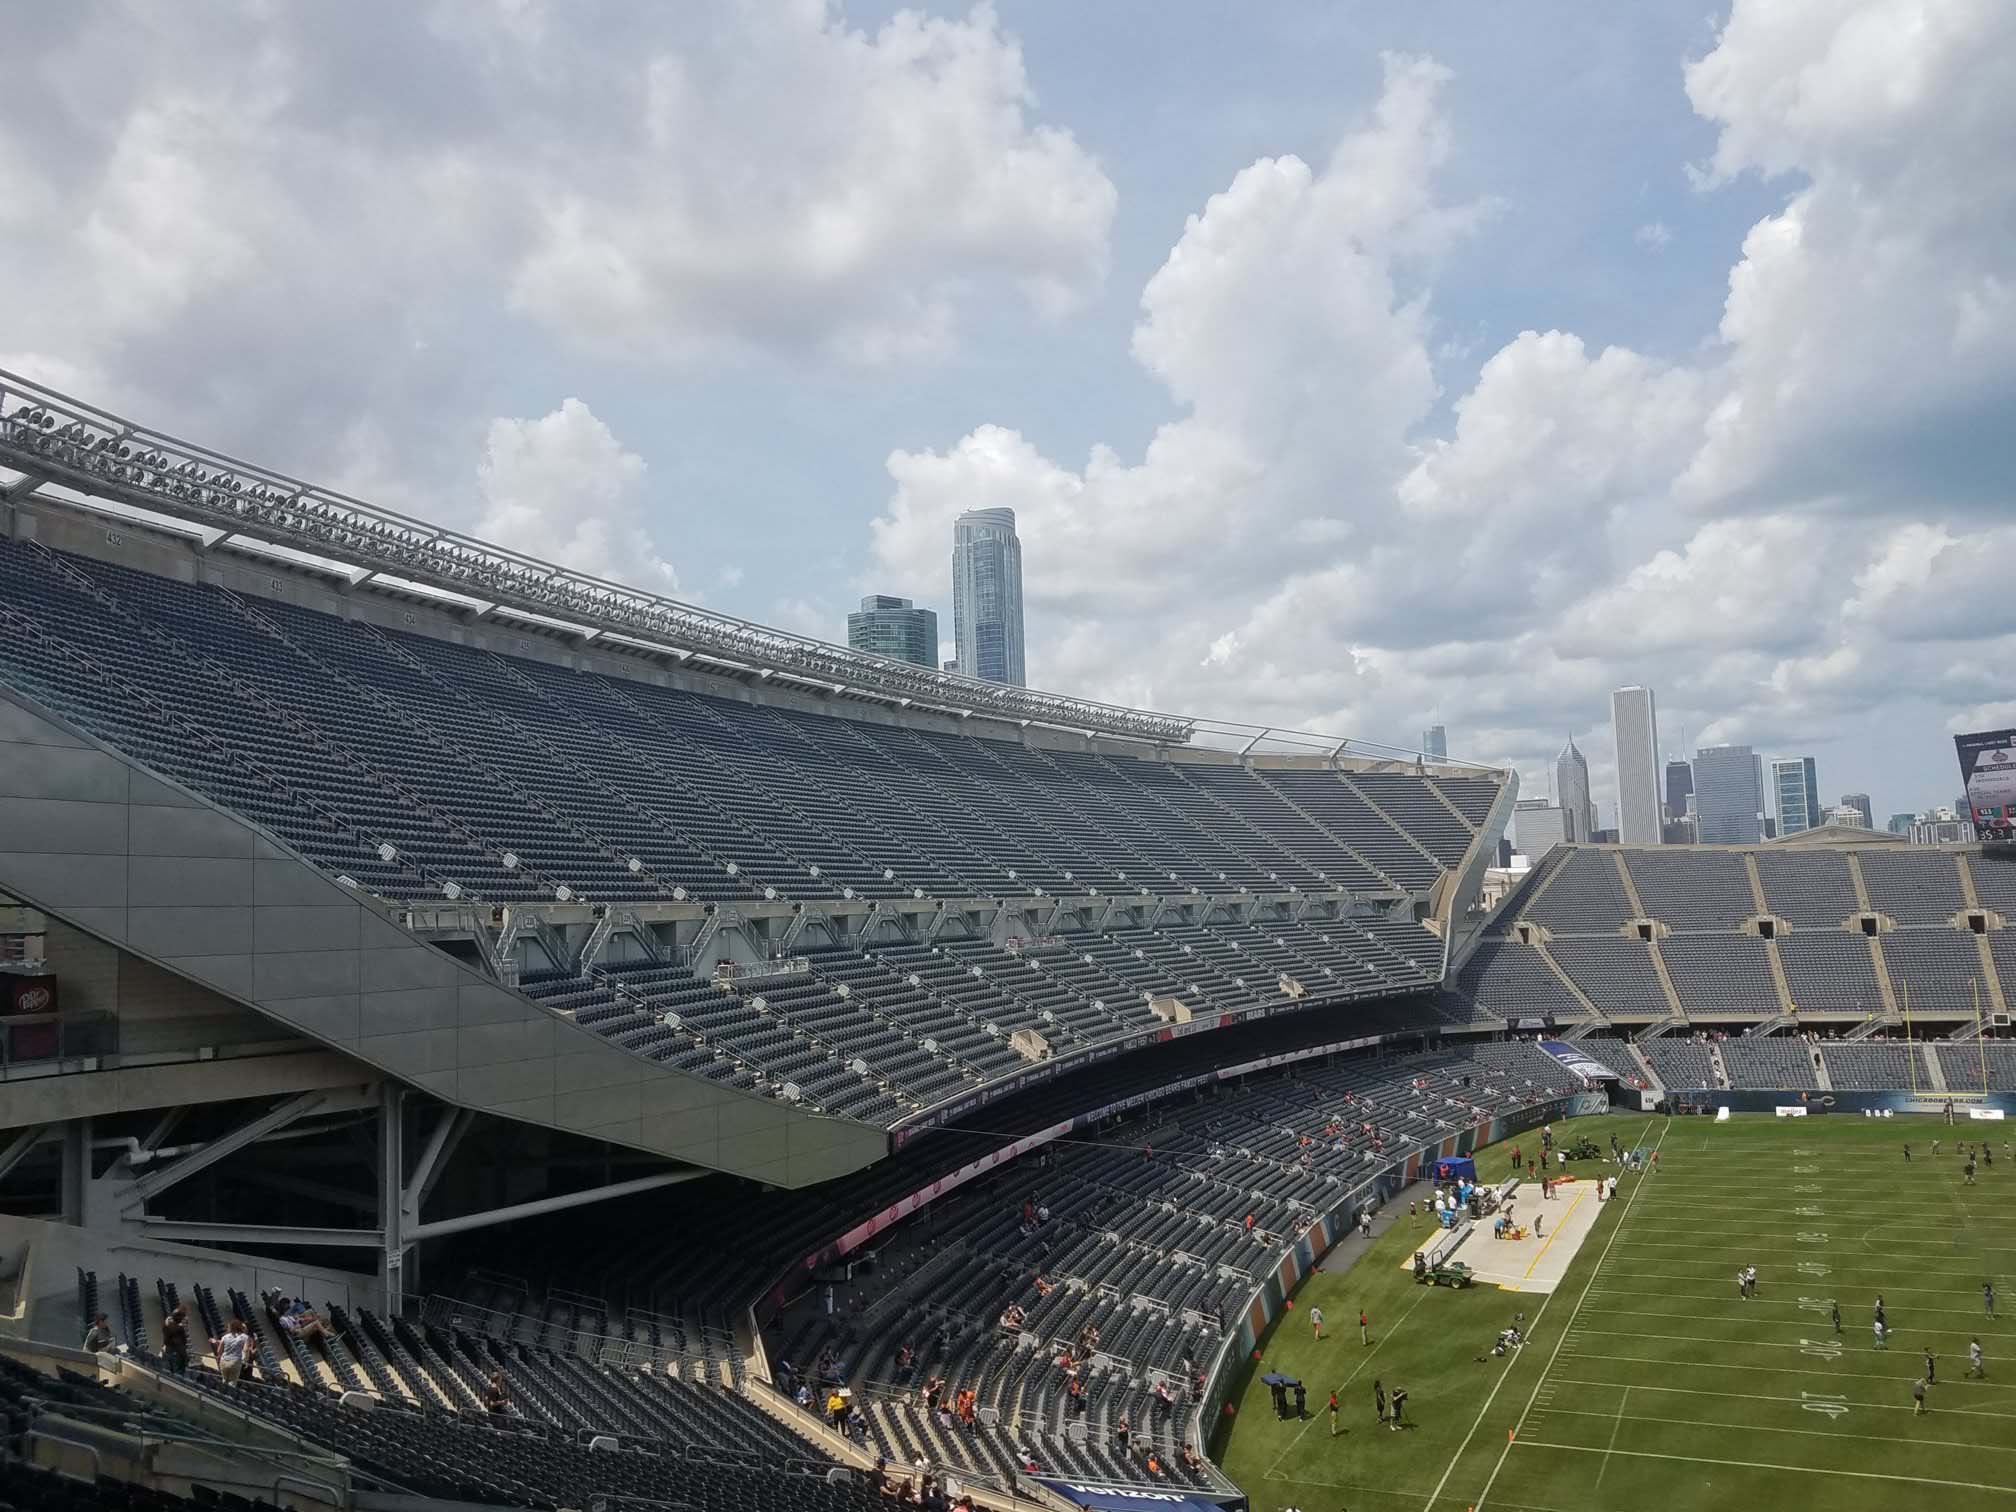 west stands at Soldier Field